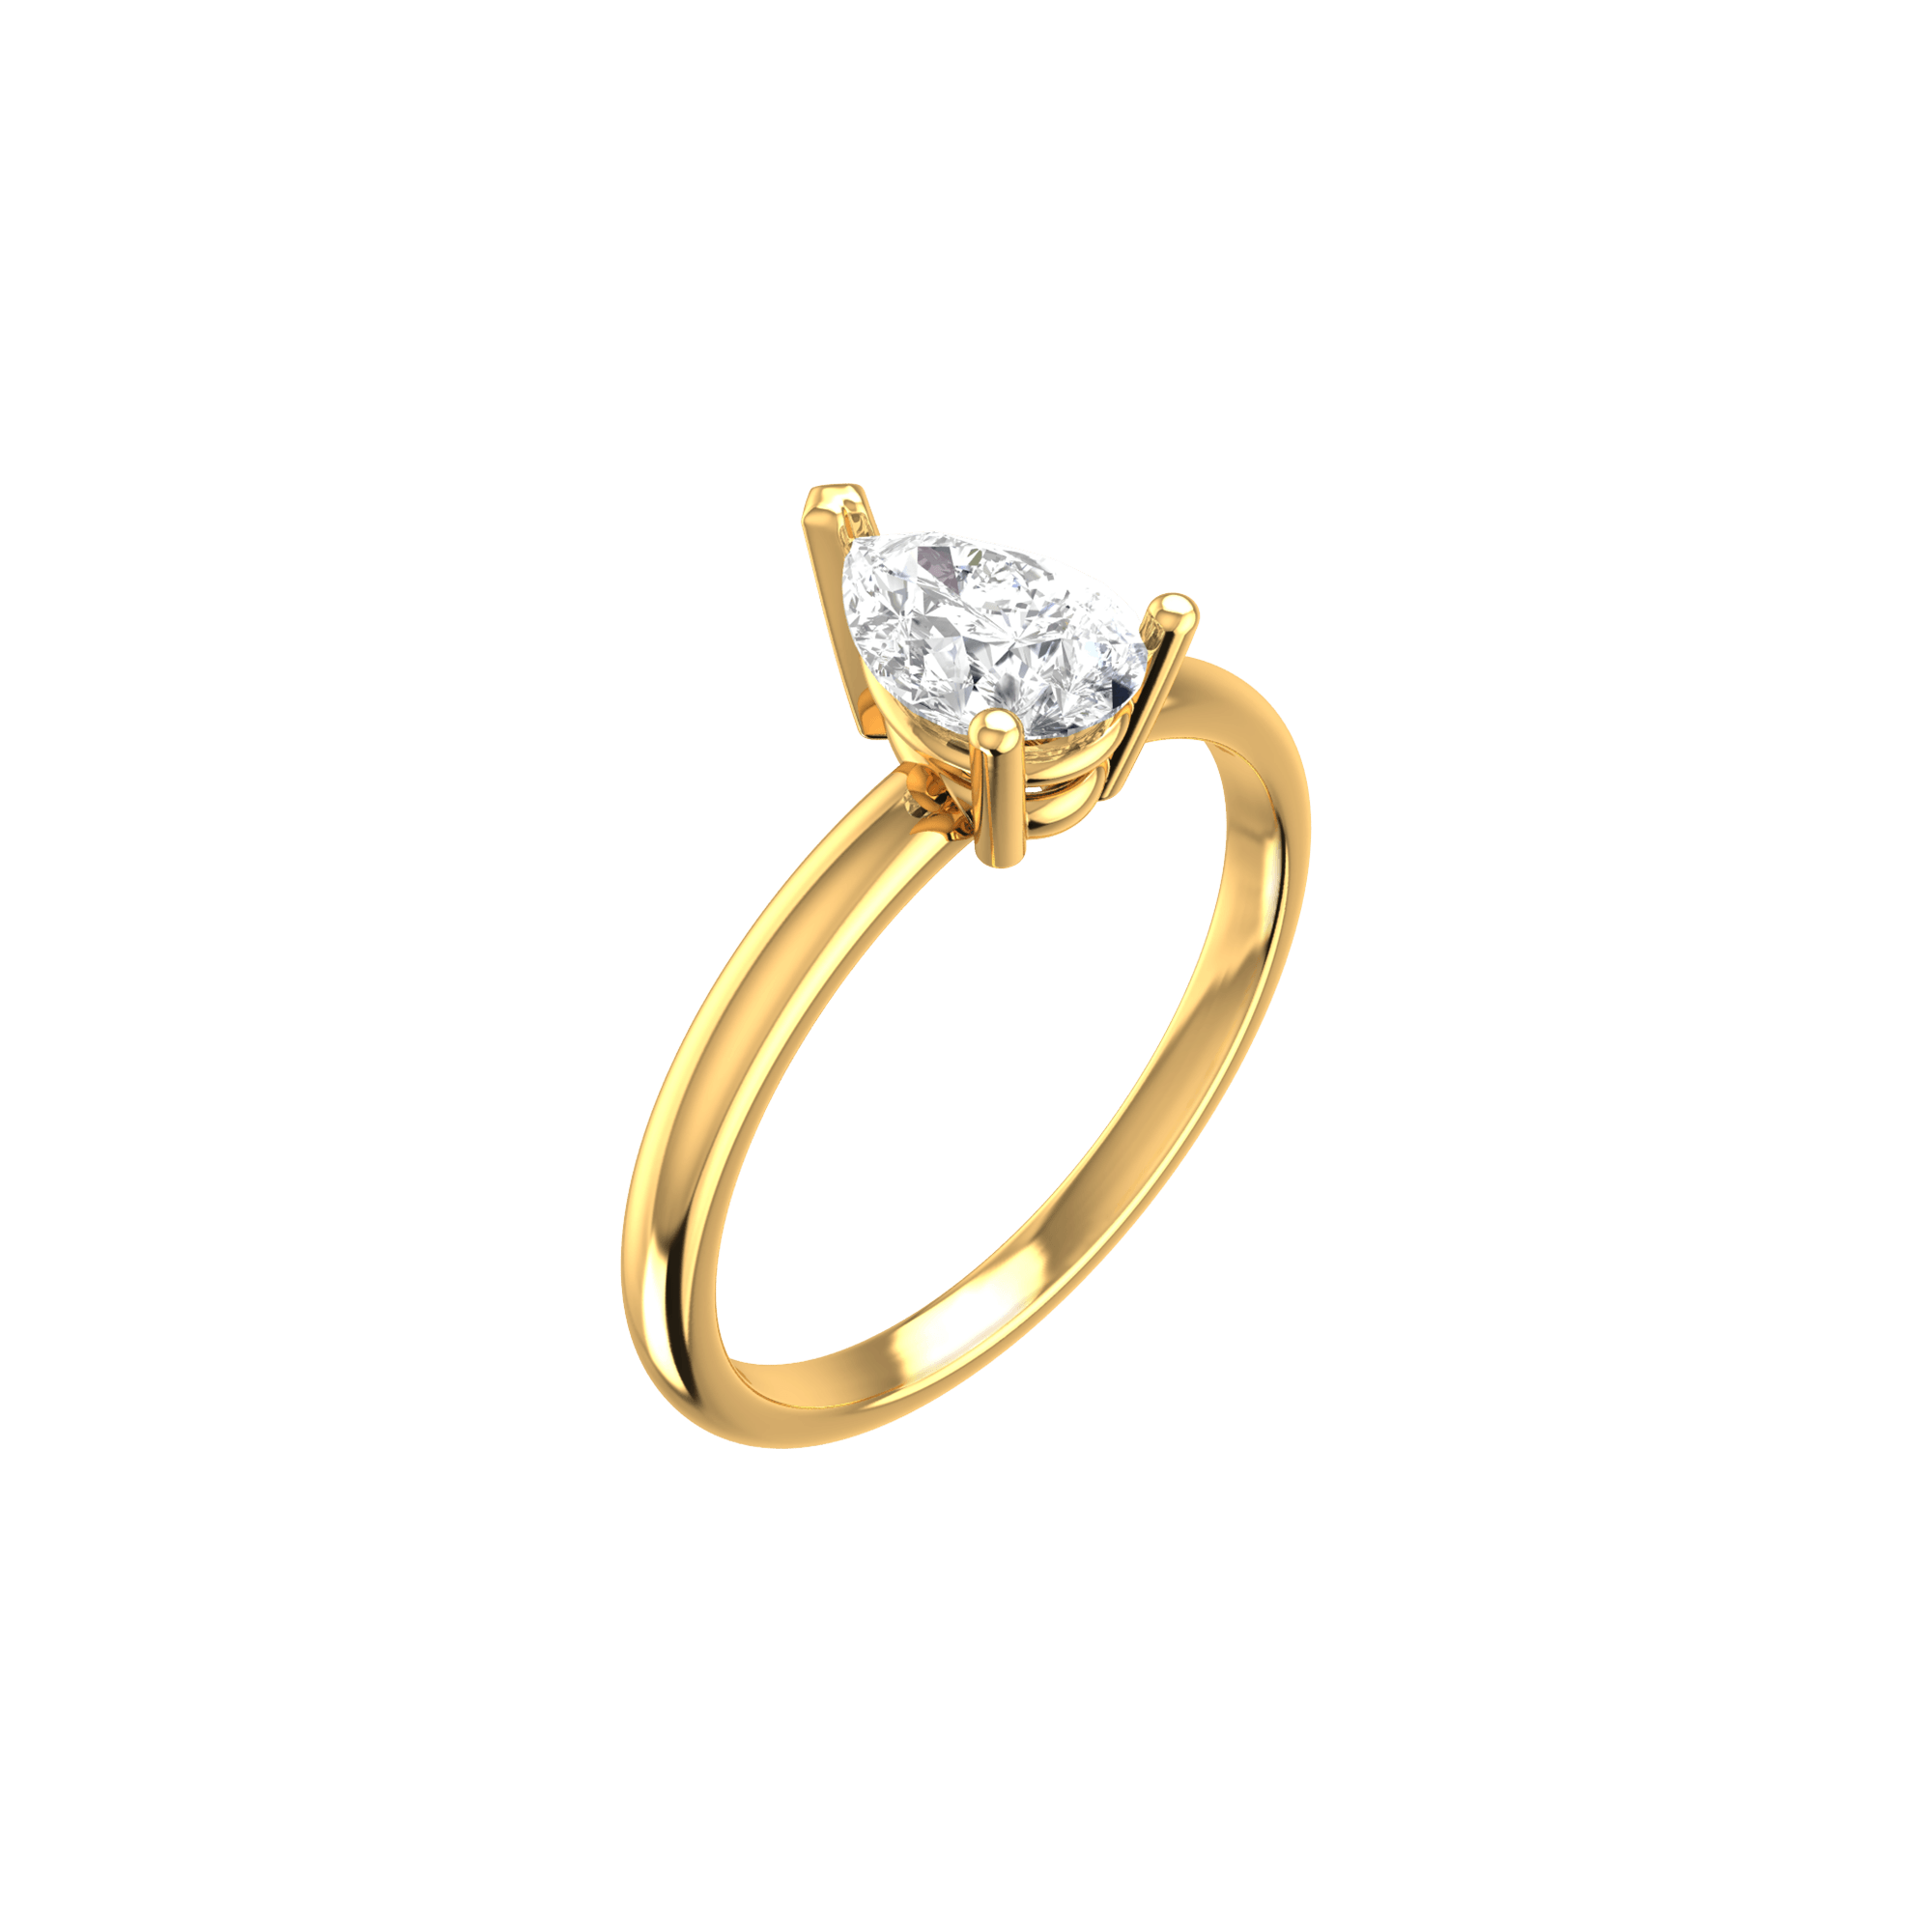 Pear Shaped Lab-Grown Diamond Solitaire Ring | 18K yellow gold / 5 / 0.6ct  | Jewelry | The Future Rocks